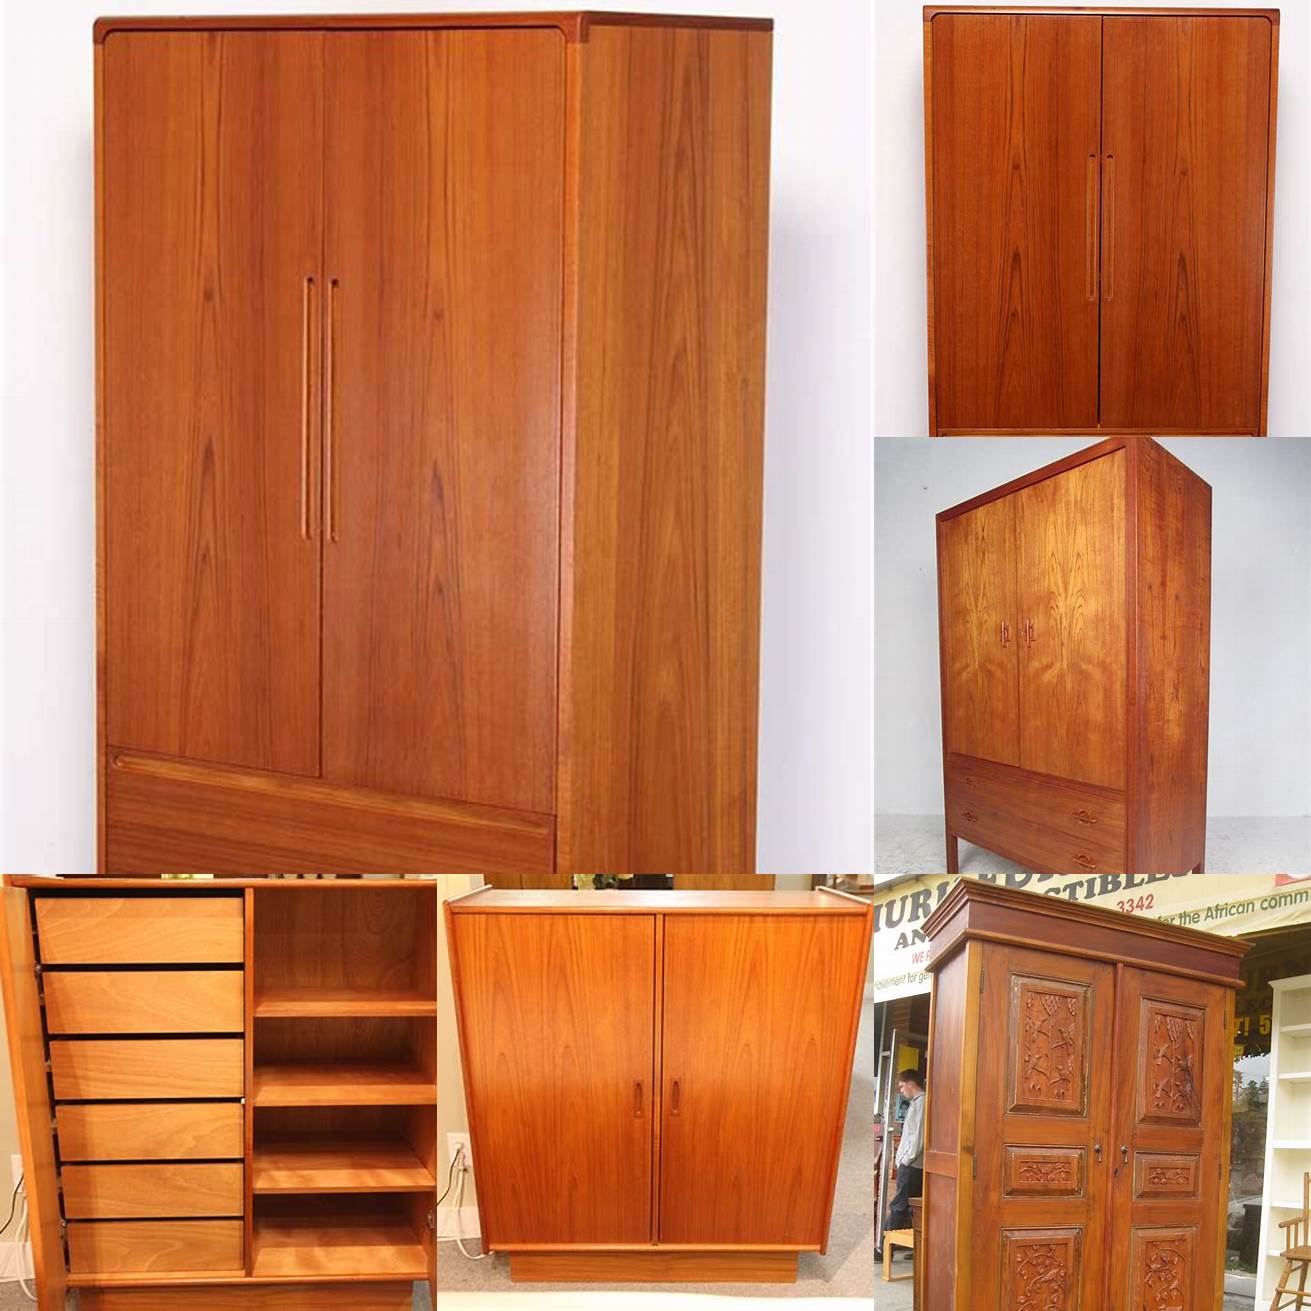 A teak armoire with a wood insert